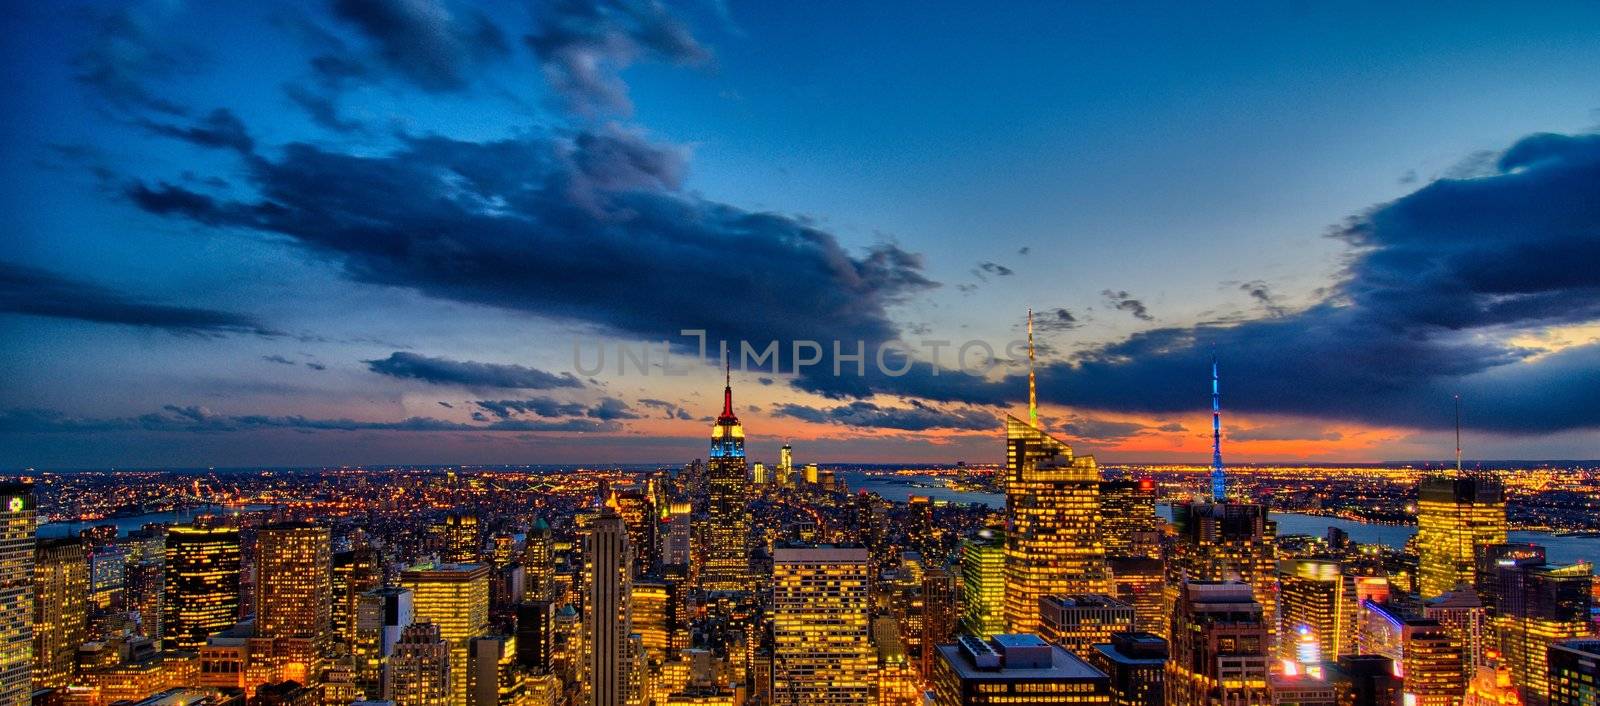 Wonderful night colors and light of Manhattan, New York City - A by jovannig